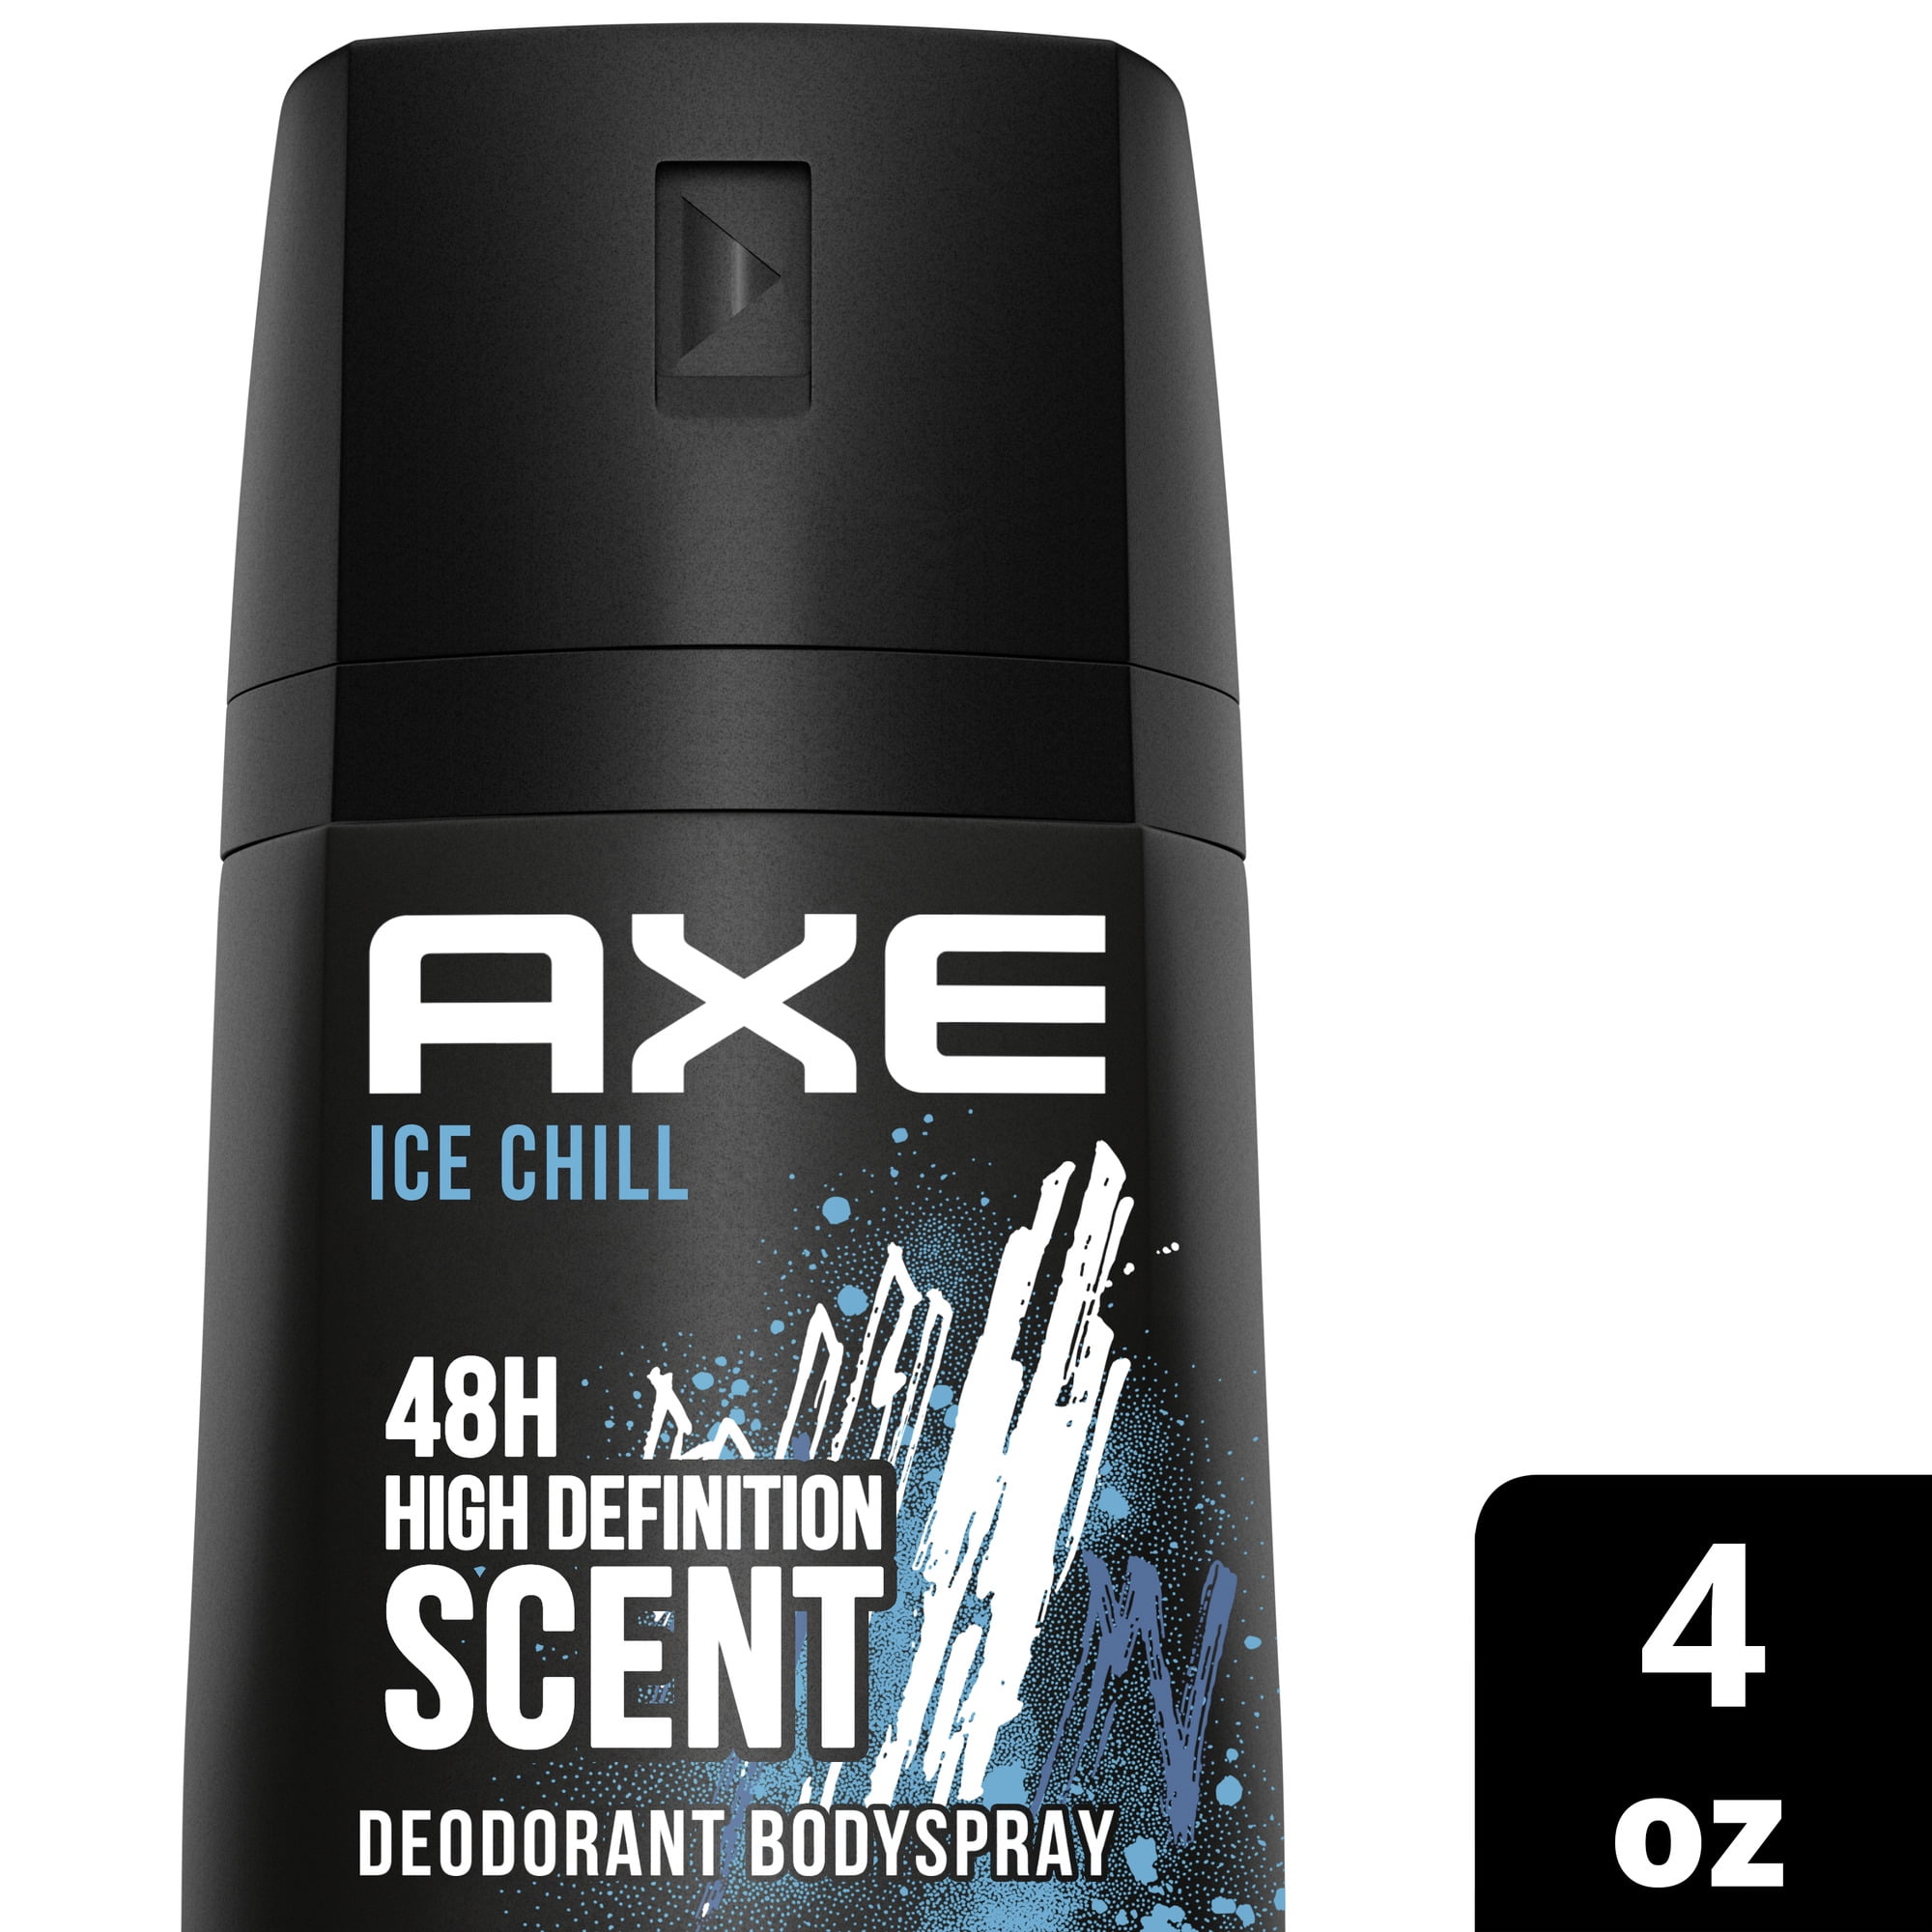 AXE Dual Action Body Spray Deodorant for Men, Ice Chill Icy Menthol Formulated without Aluminum, 4.0 oz Walmart.com